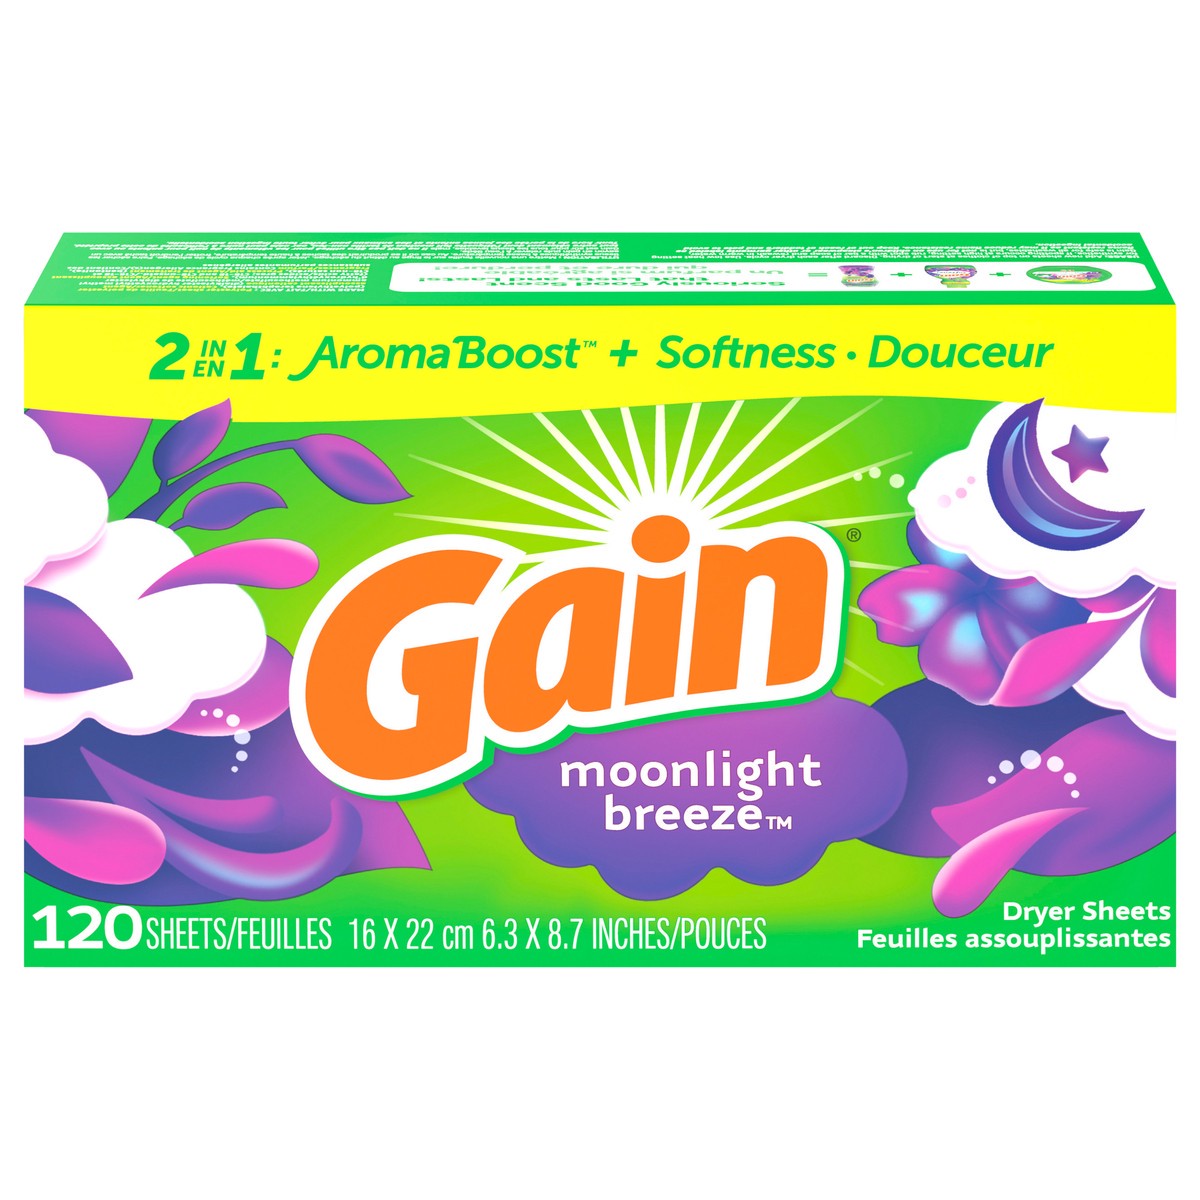 slide 5 of 12, Gain dryer sheets, 120 Count, Moonlight Breeze Scent Laundry Fabric Softener Sheets with 2-in-1 Aromaboost Plus Softness, 120 ct